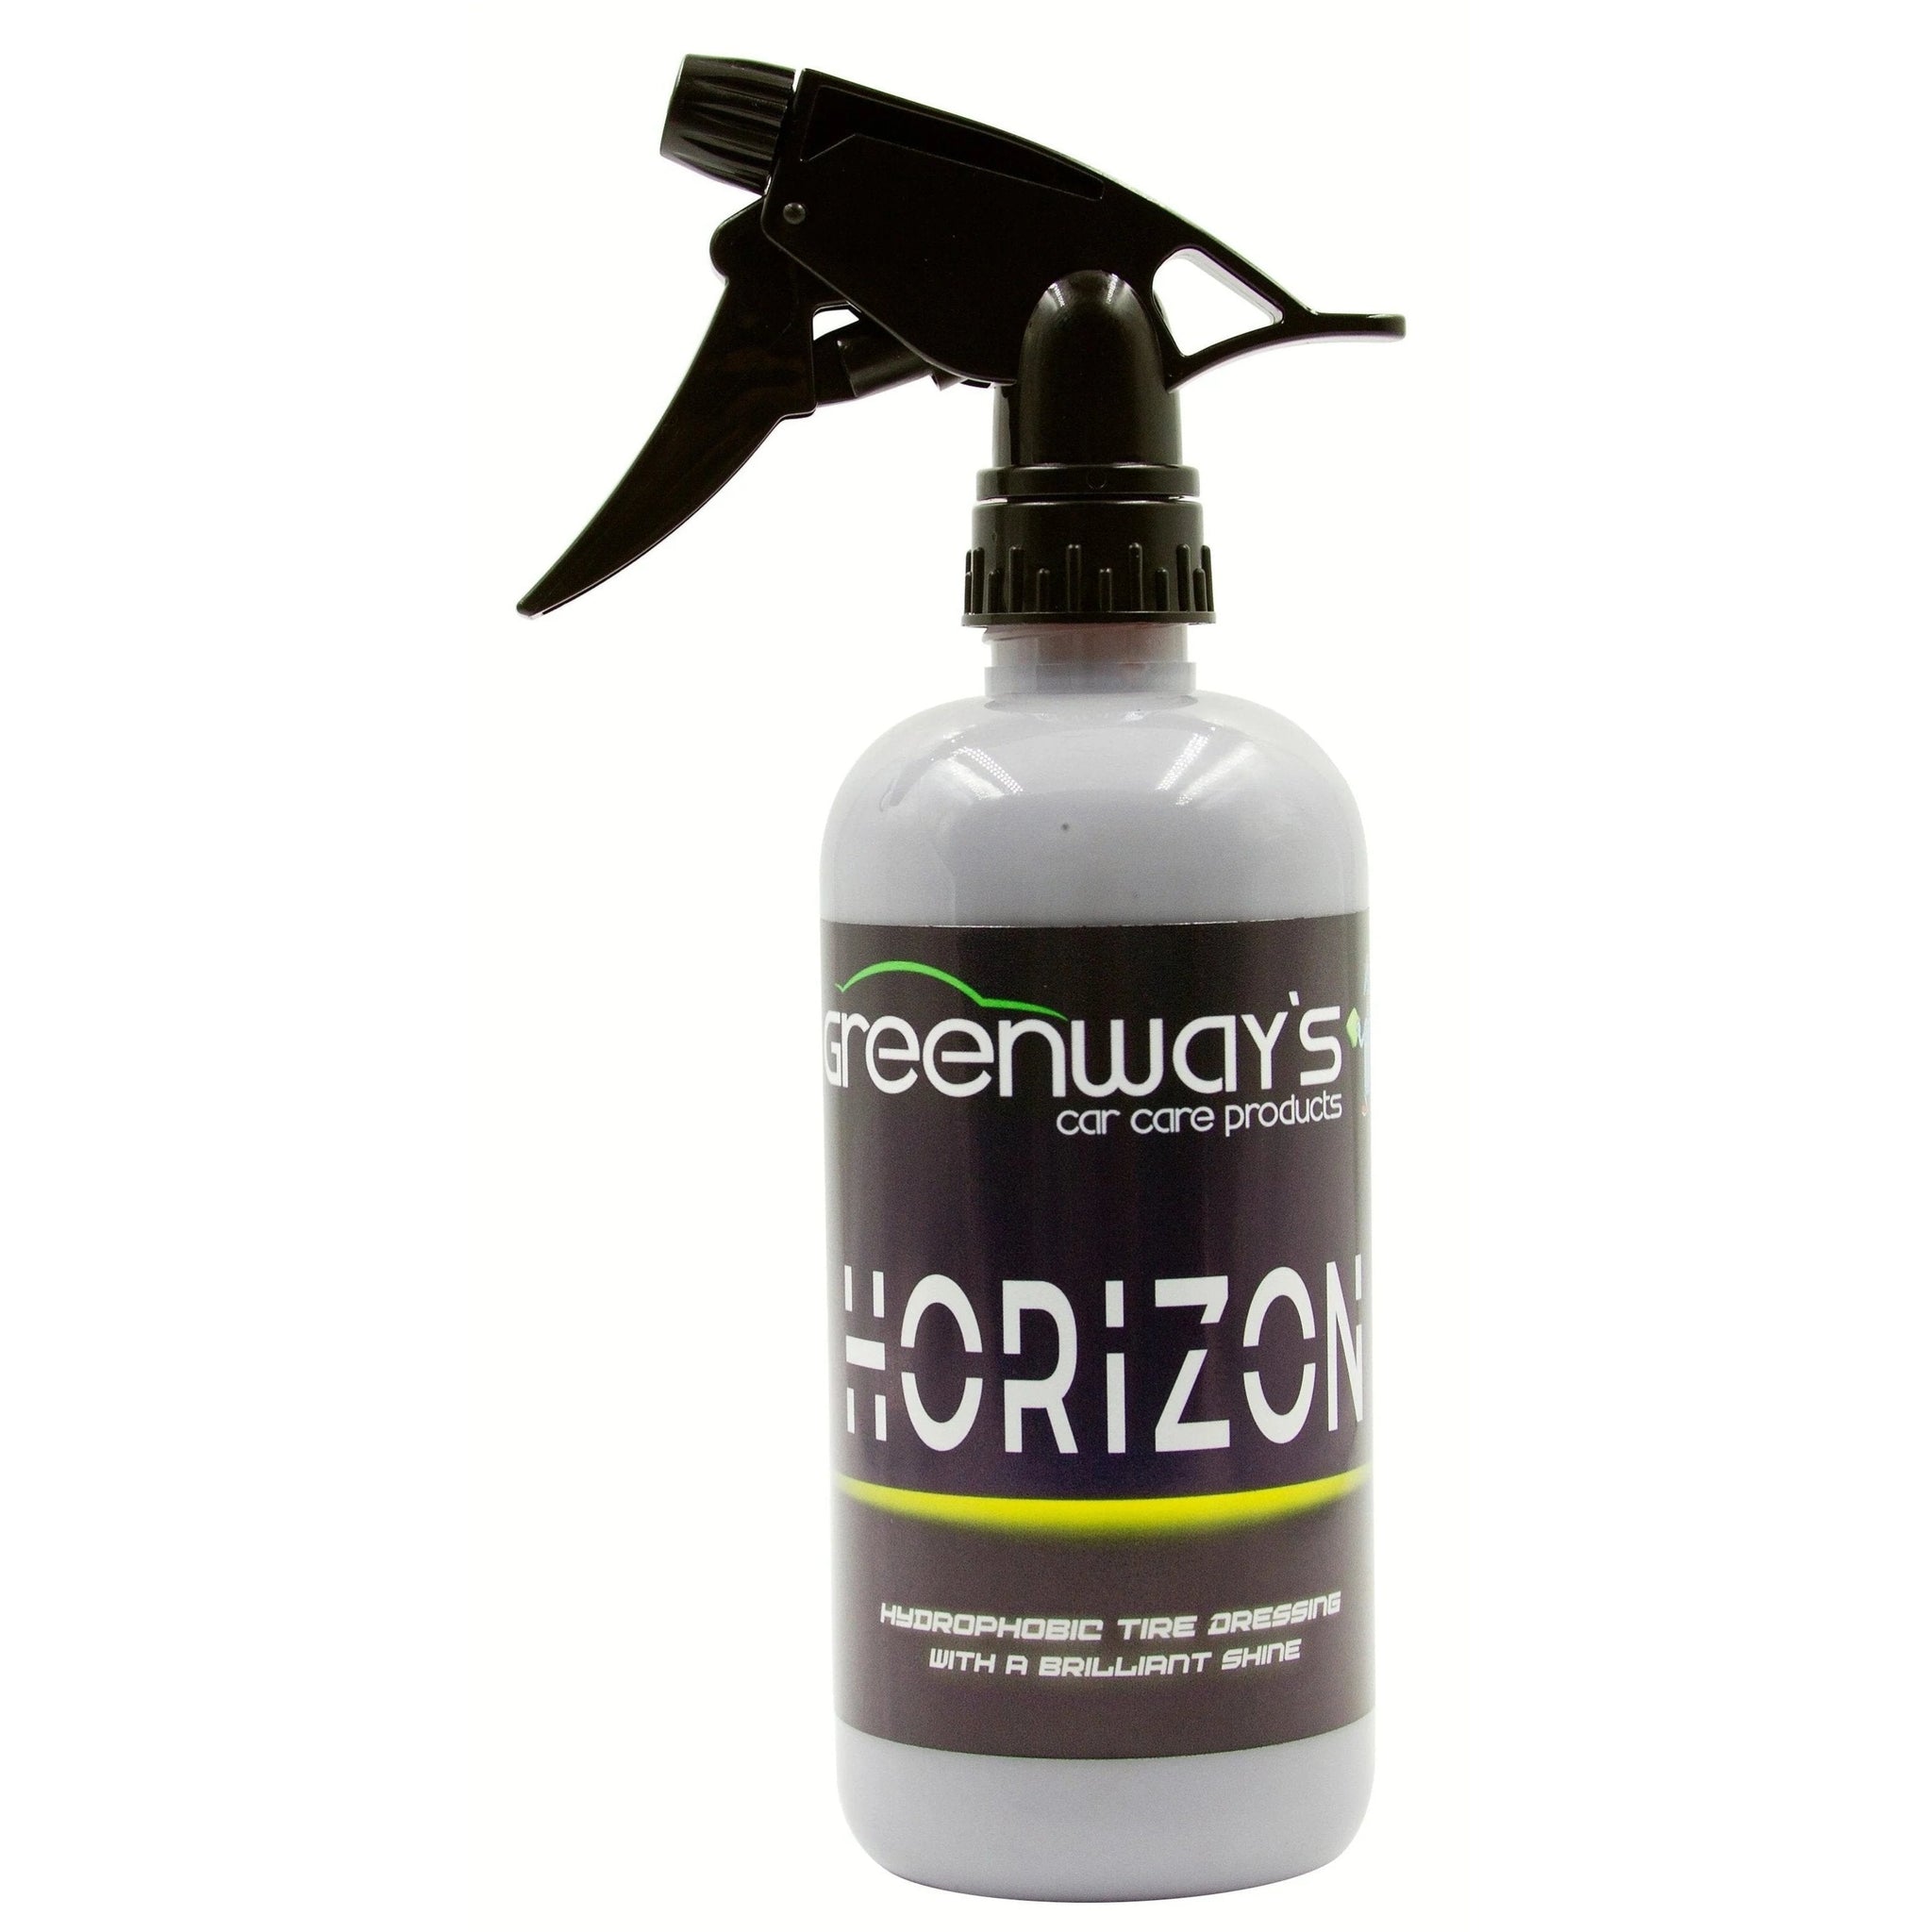   Greenway’s Horizon, high gloss, water-base, wet look, silicone-free, thin tire dressing spray, candy scent. 16 ounces.